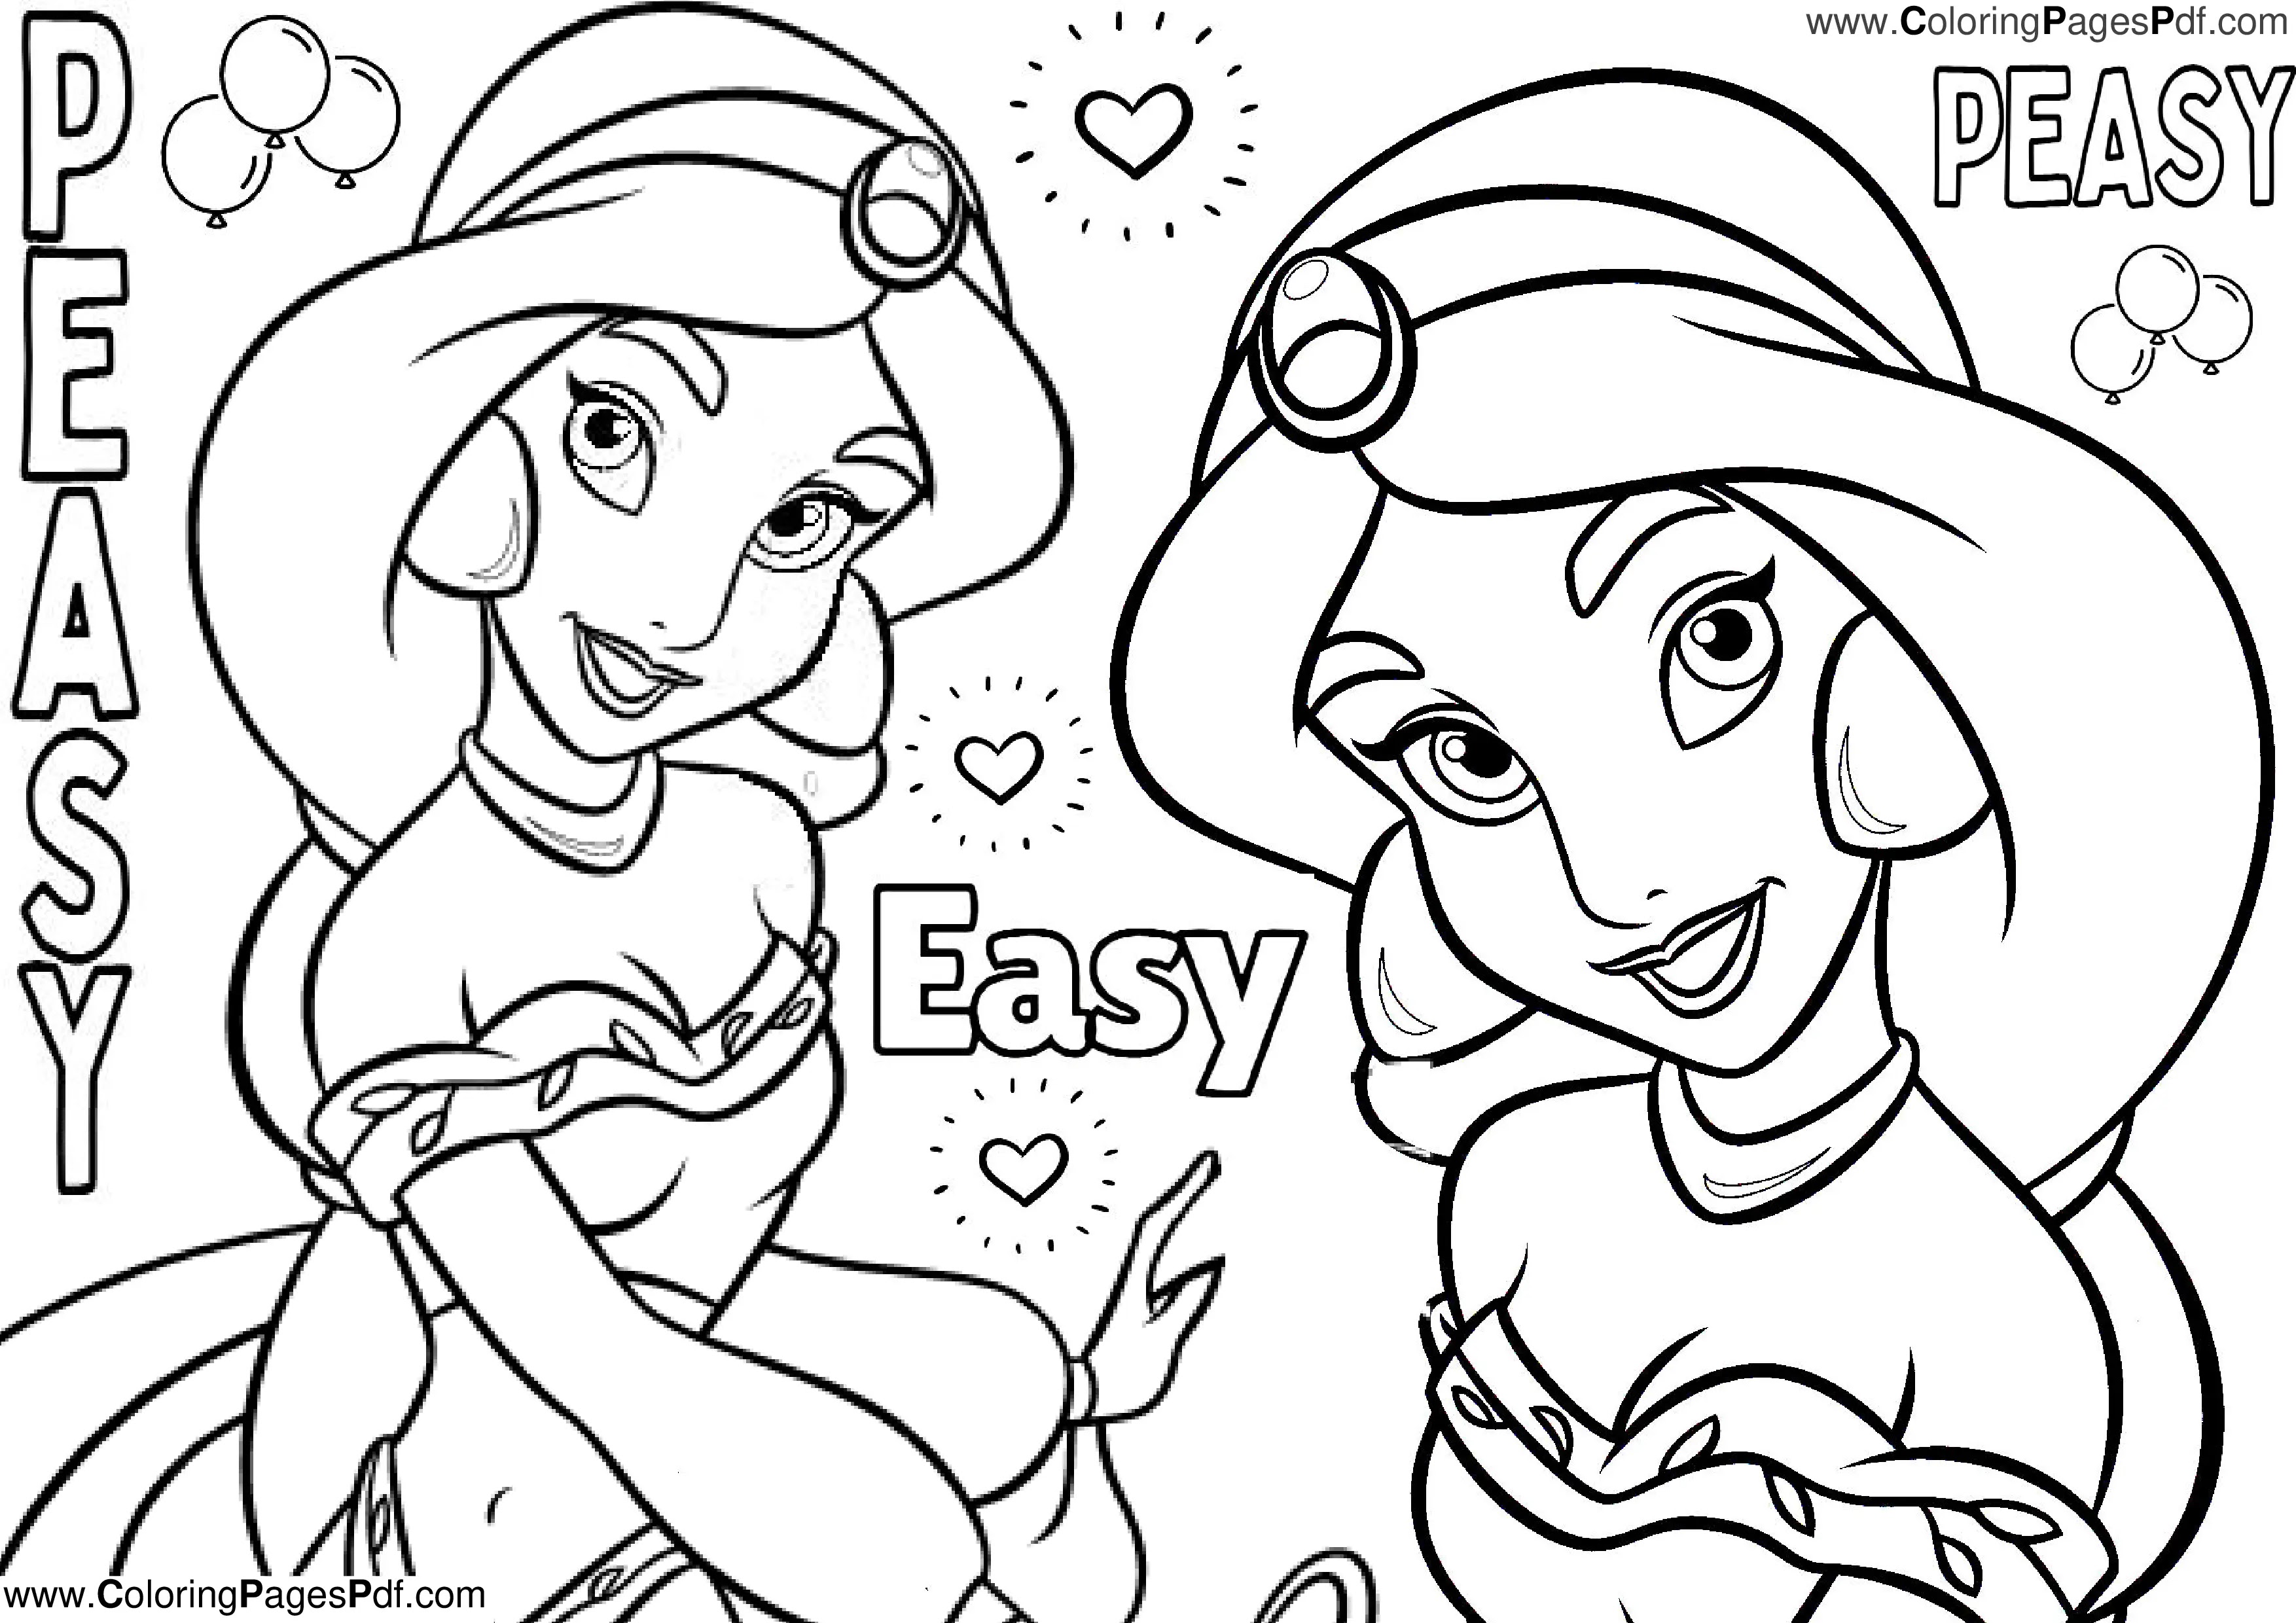 Jasmine coloring pages for kids